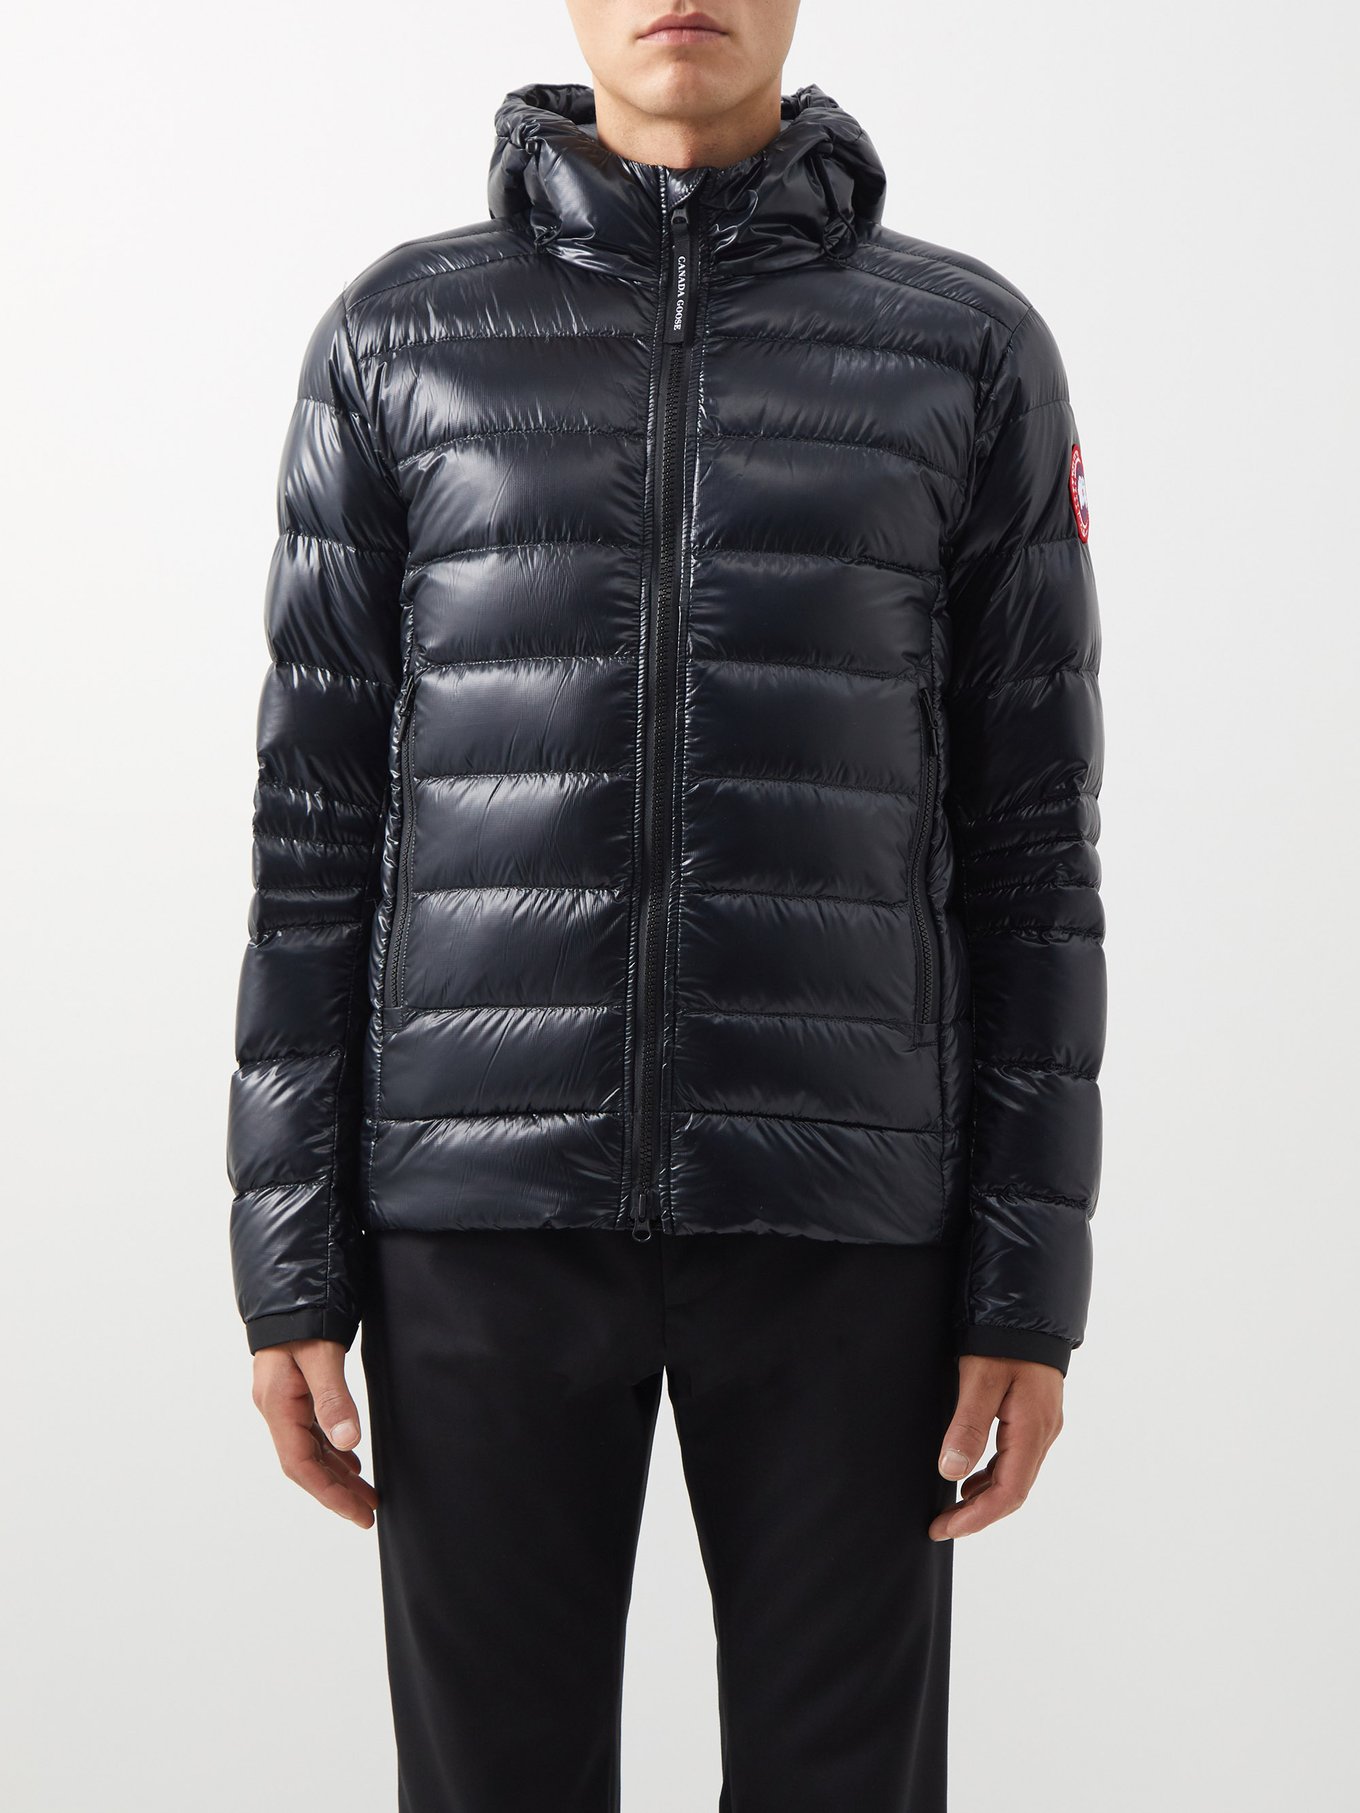 Tom Ford Leather and Webbing-Trimmed Quilted Shell Down Jacket - Men - Black Coats and Jackets - L